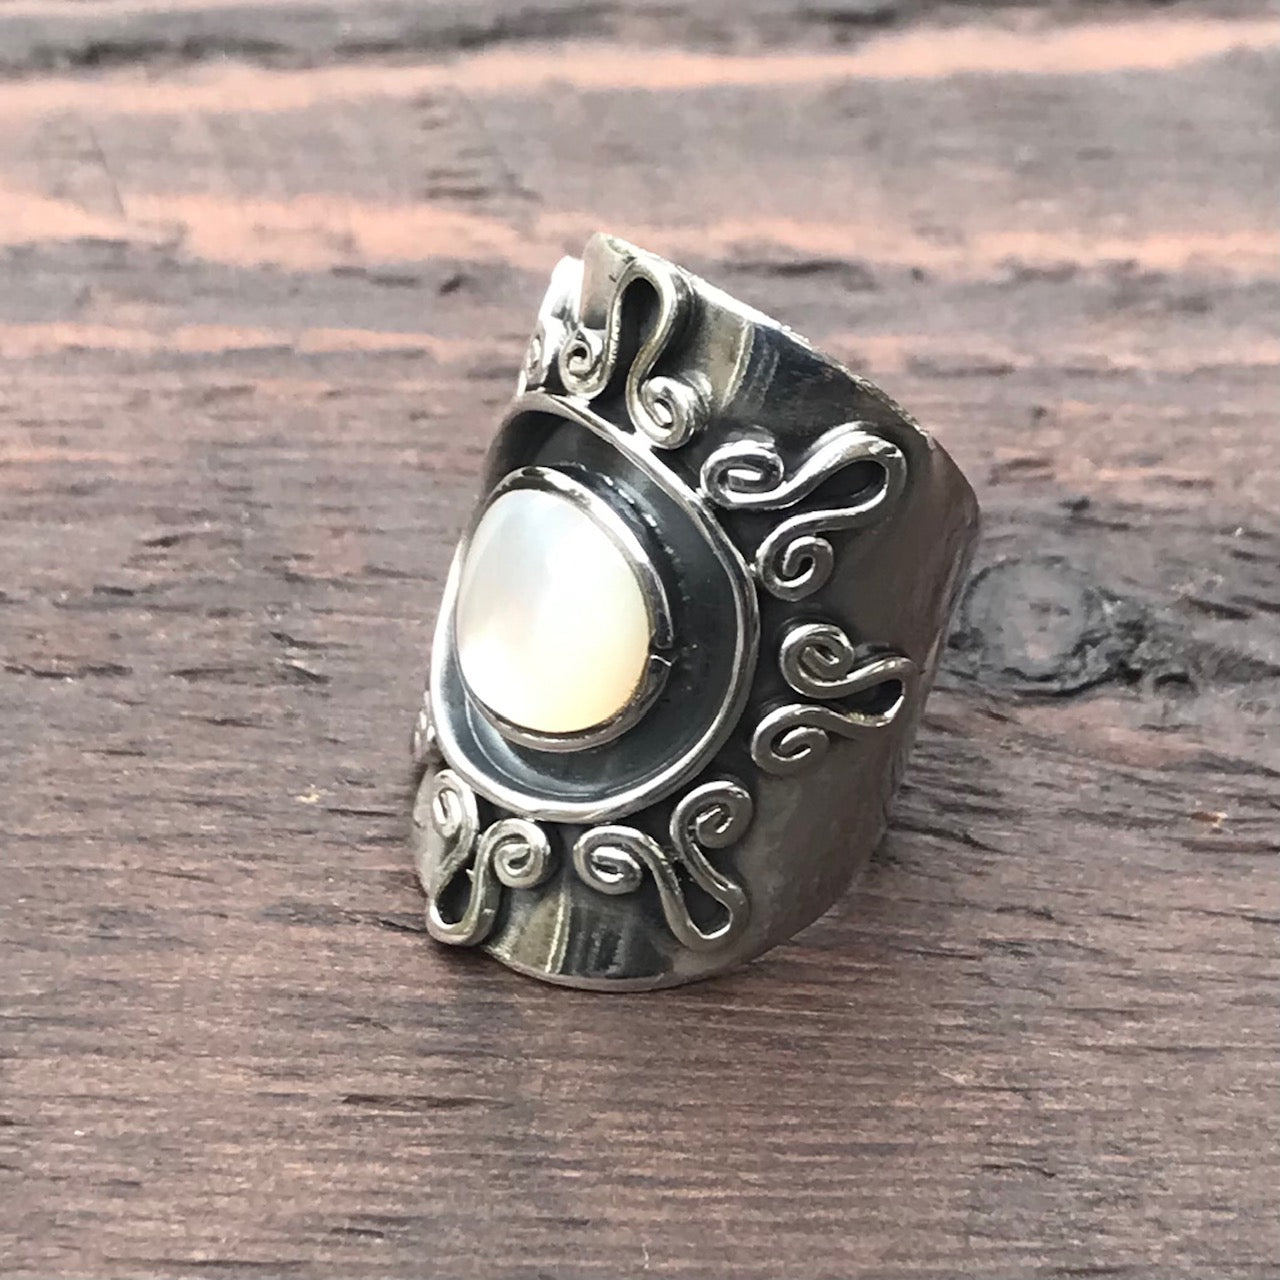 Tribal Swirl Sterling Silver & Mother of Pearl Ring